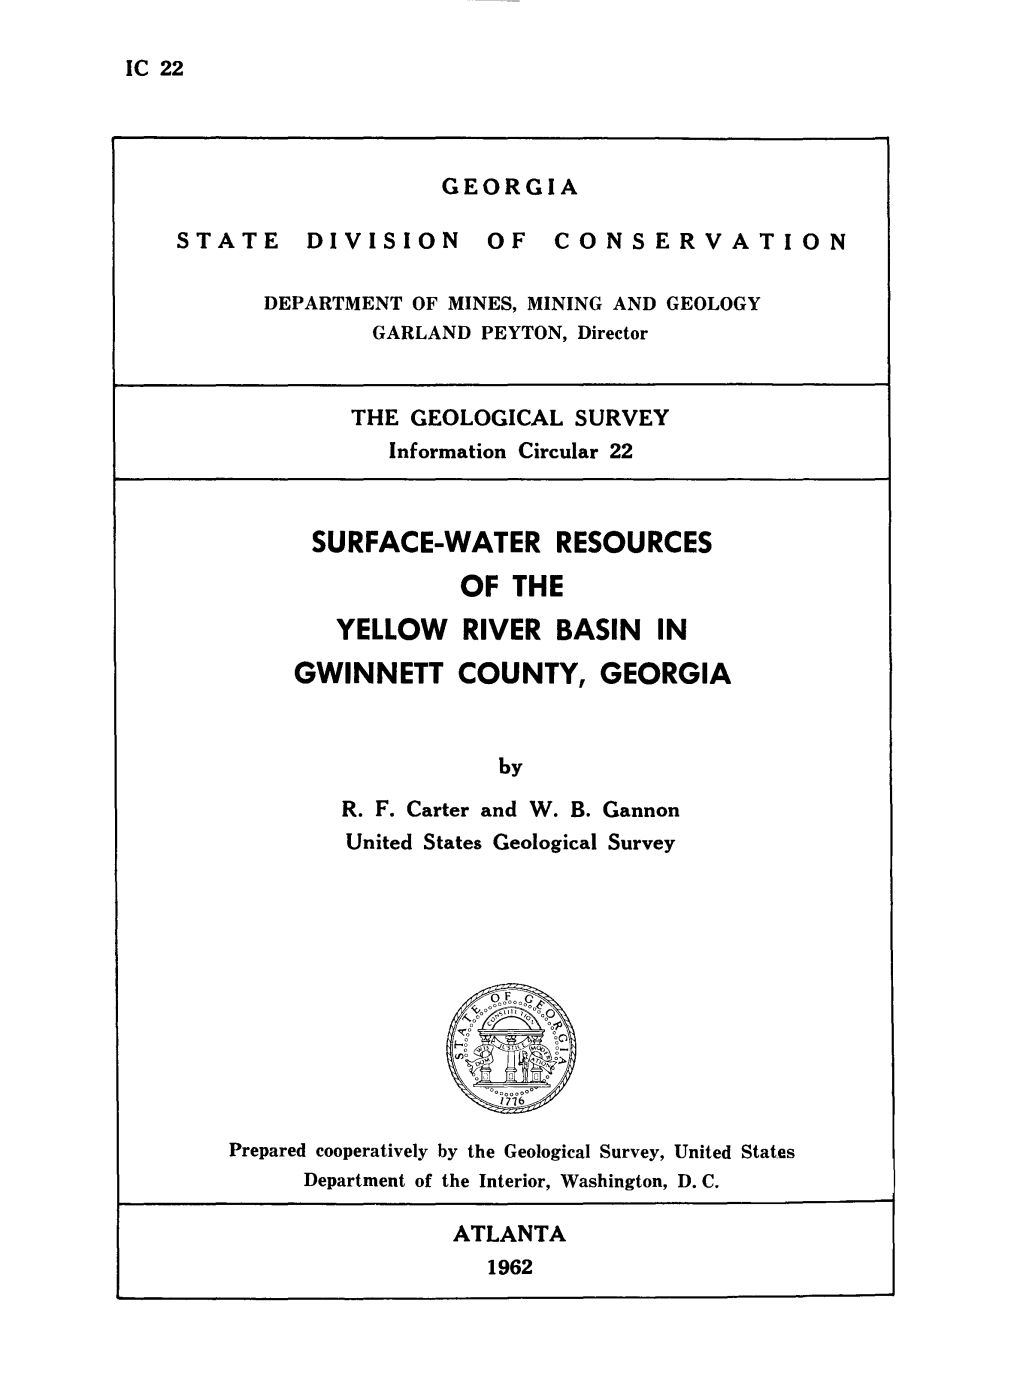 Surface-Water Resources of the Yellow River Basin in Gwinnett County, Georgia